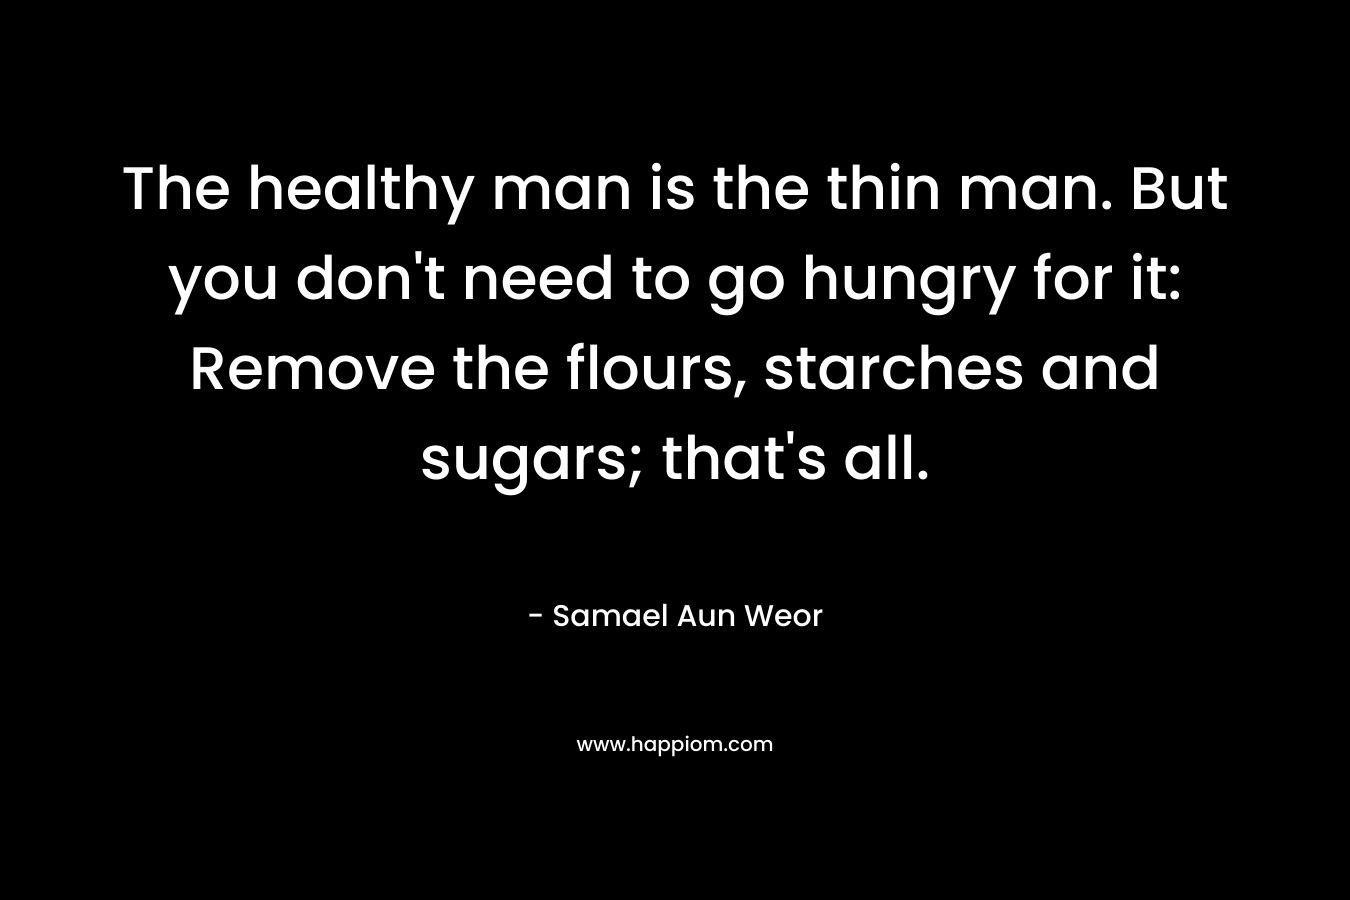 The healthy man is the thin man. But you don't need to go hungry for it: Remove the flours, starches and sugars; that's all.